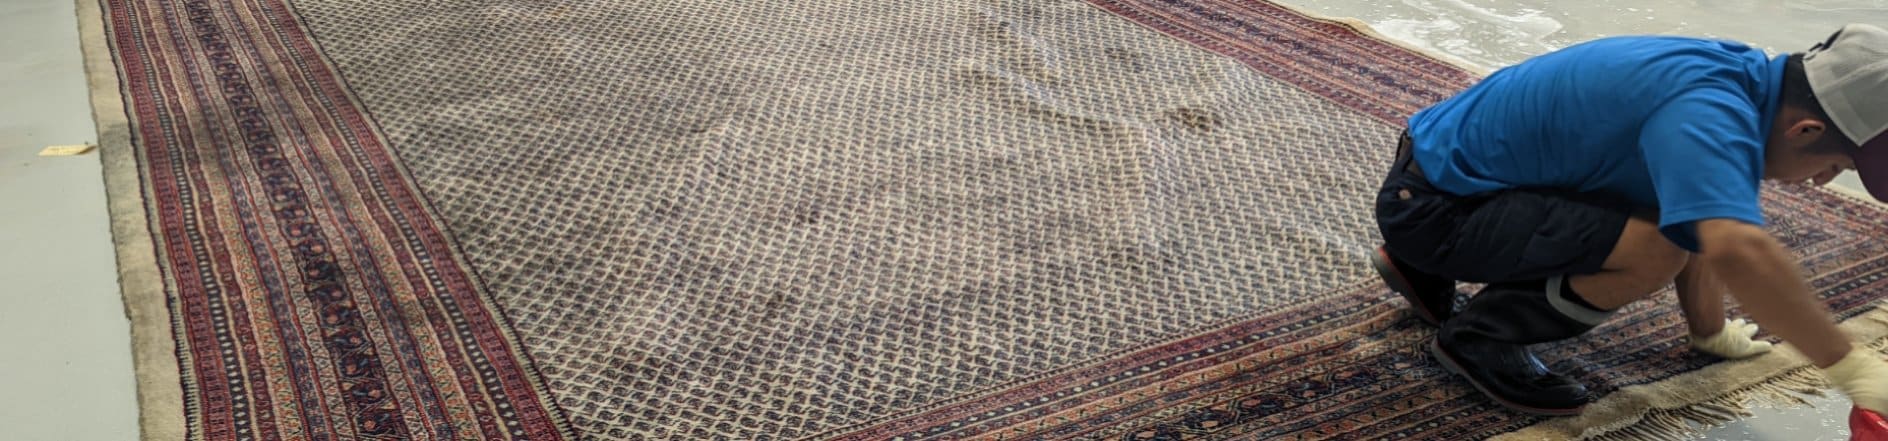 11Preserving Your Prized Possessions: A Guide to Full-Service Rug Care